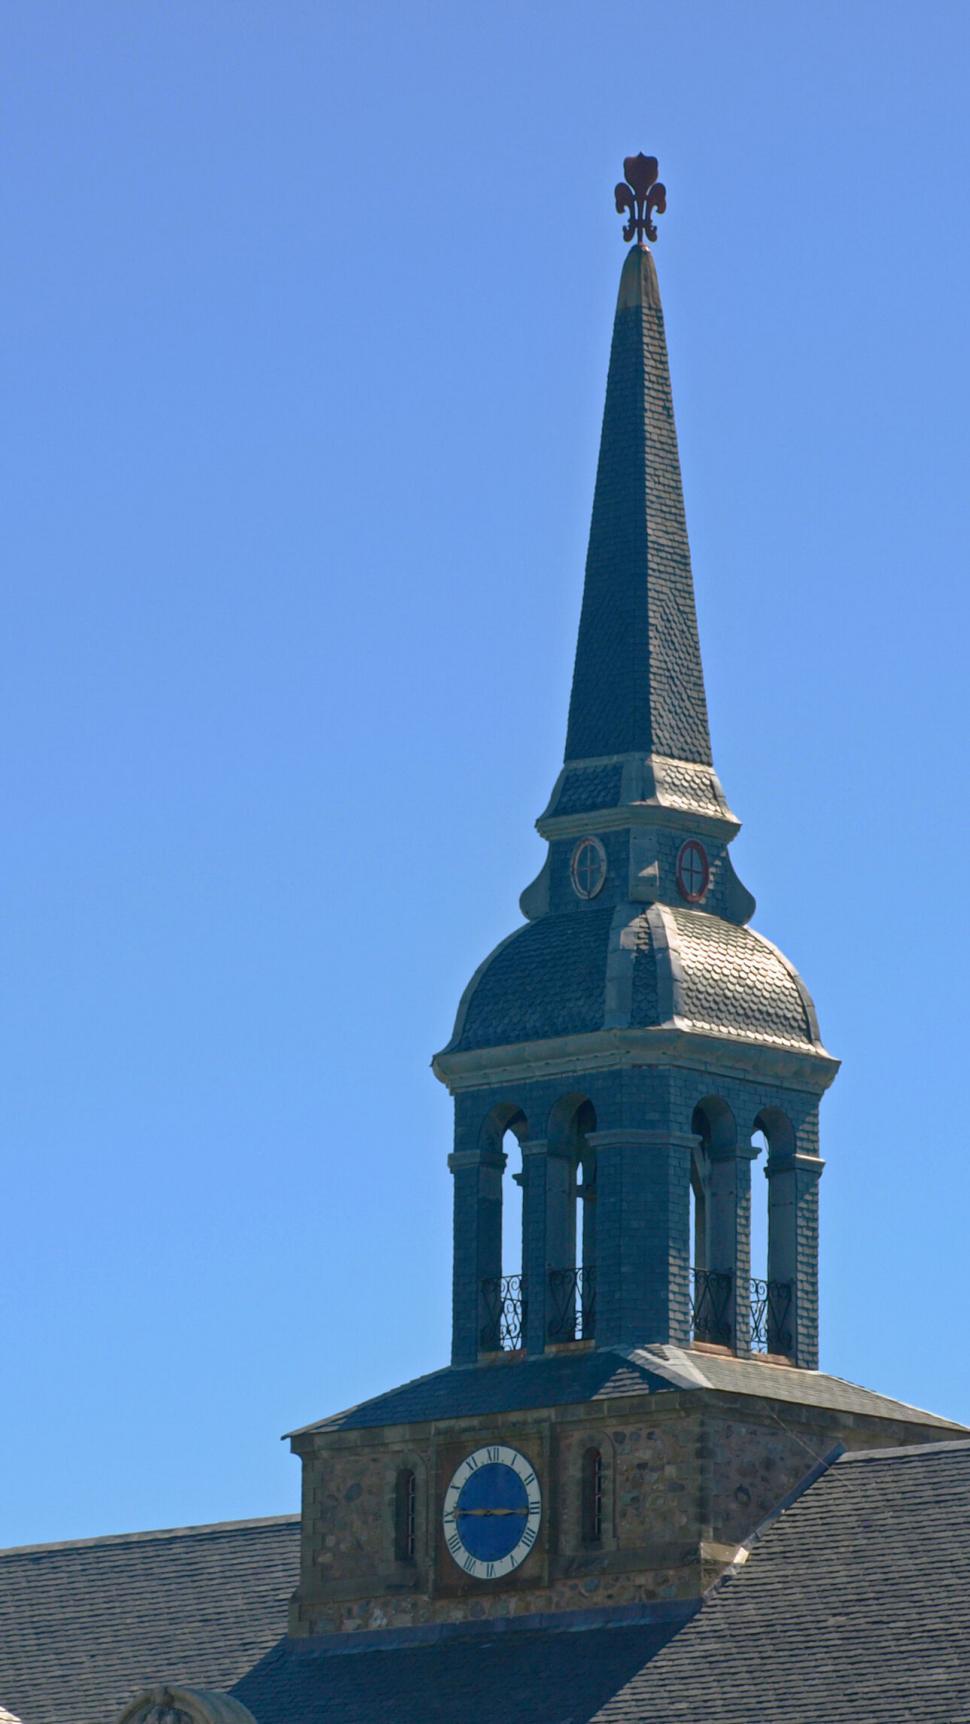 Free Image of Vintage Clock Tower against Clear Blue Sky 